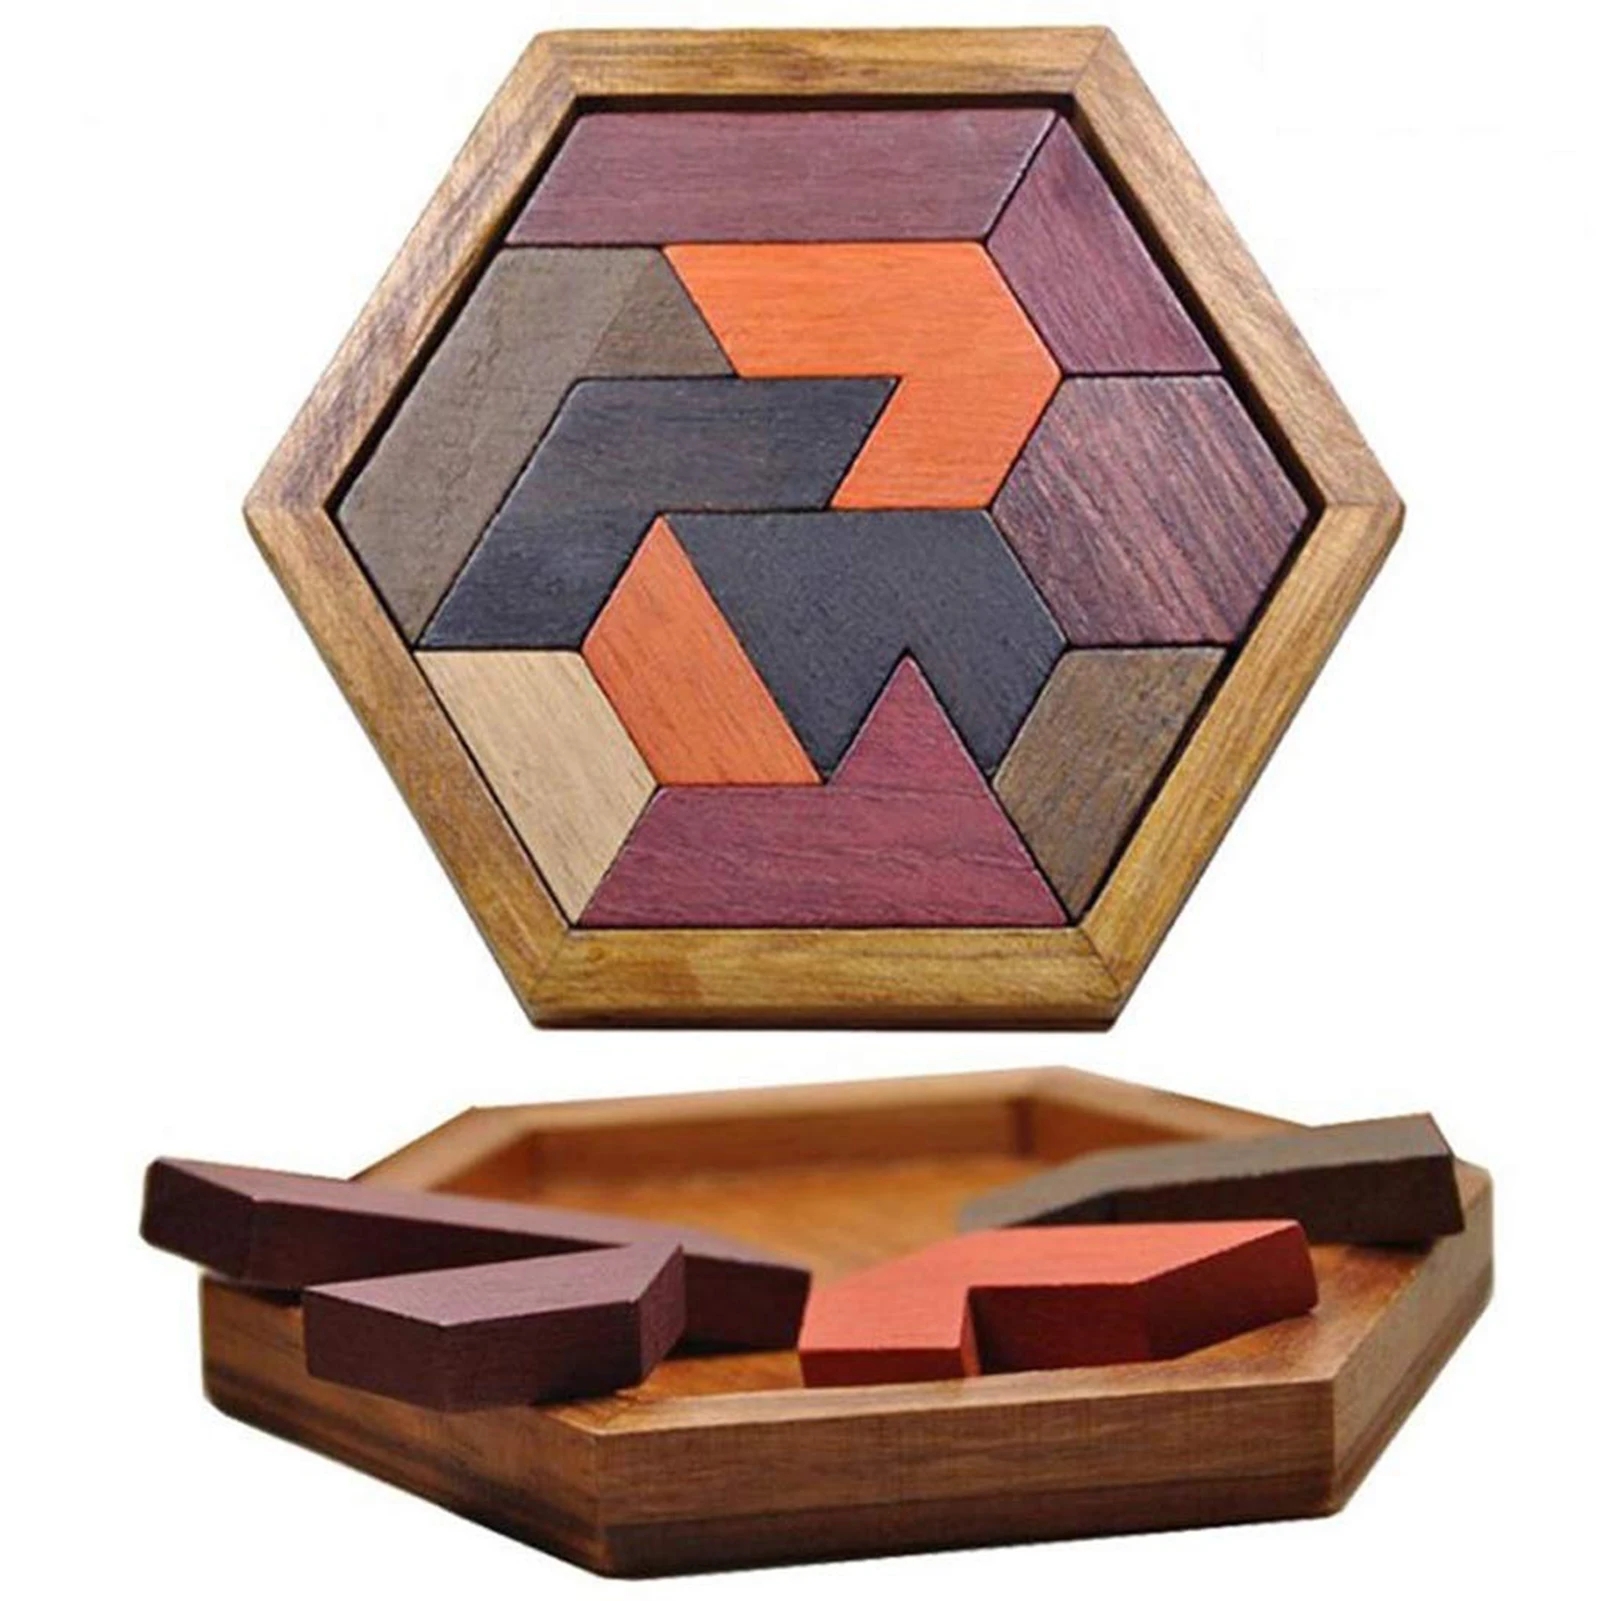 

2021 New Creative Wooden Jigsaw Puzzle Toy Educational Hexagonal Shaped Chess Game Parent-child Interactive Games Toy For Kids